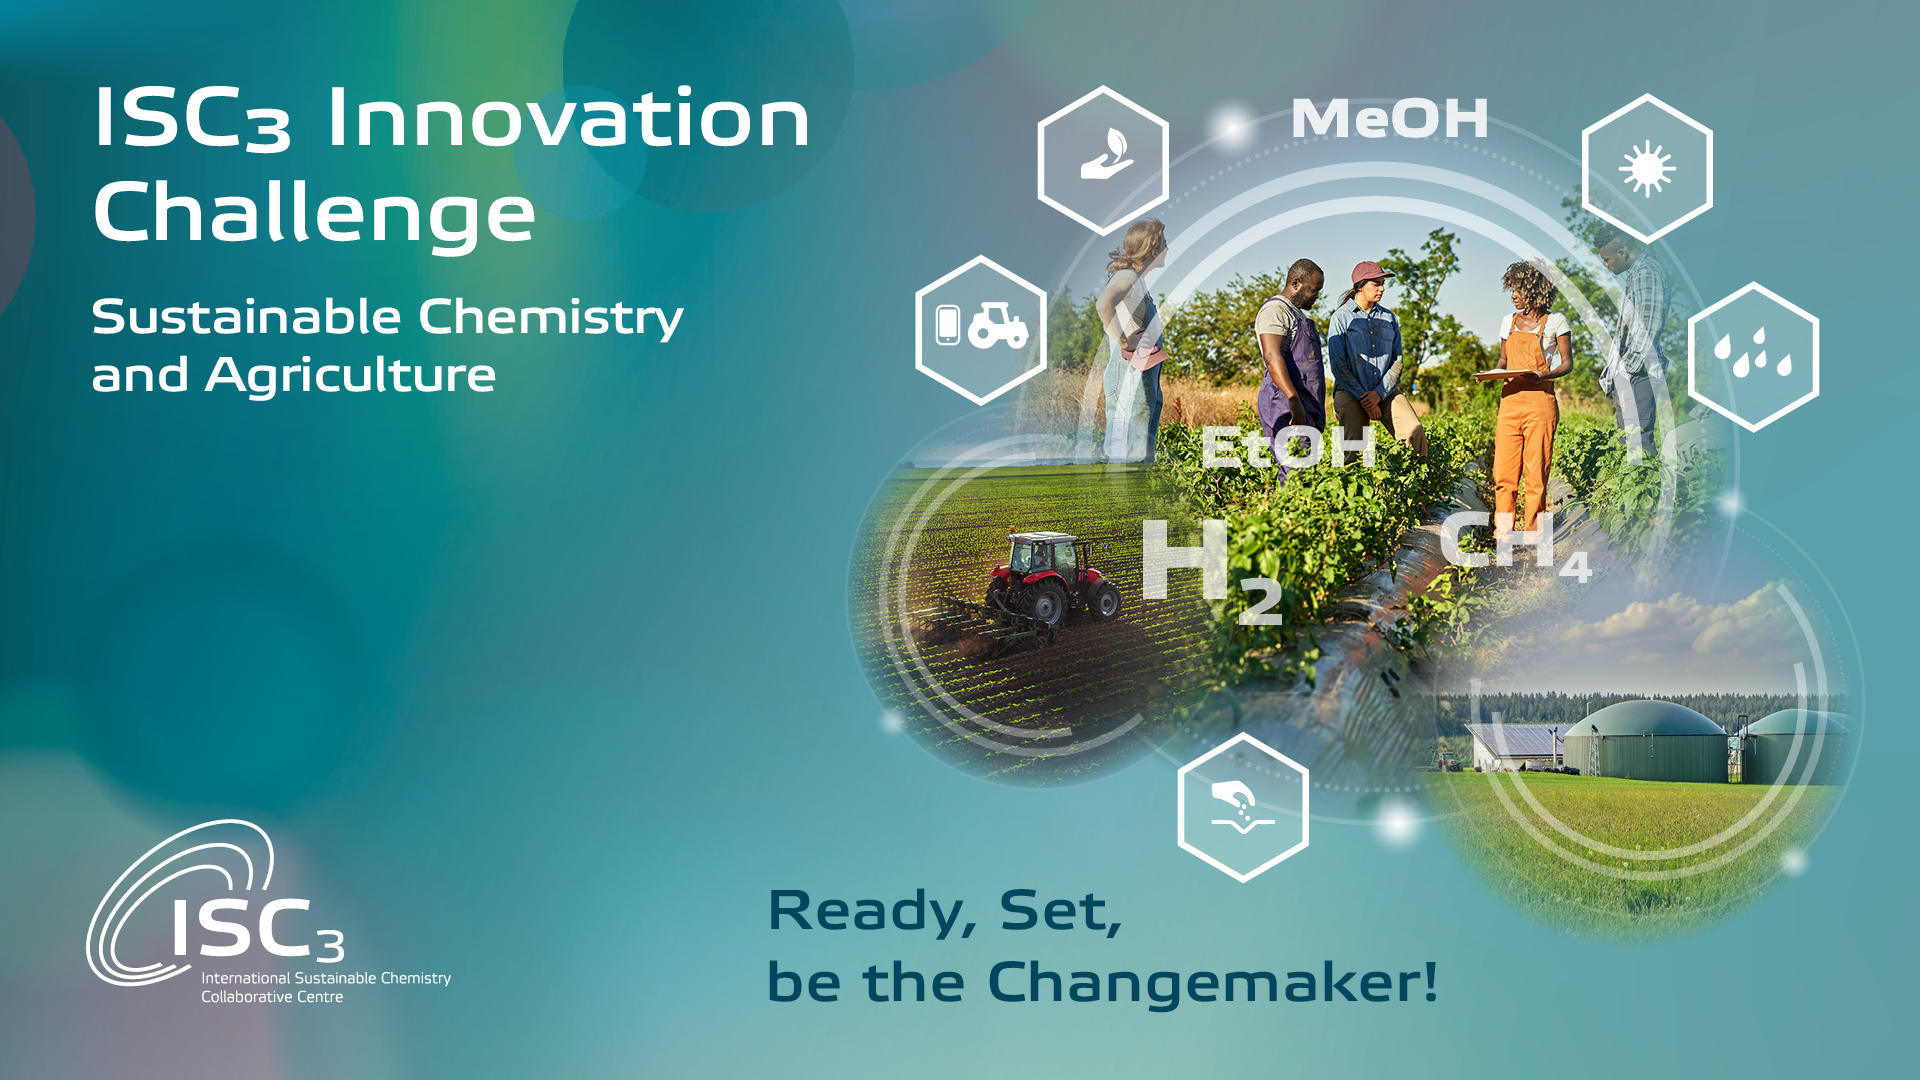 Banner announcing the ISC3 Innovation Challenge - Sustainable Chemistry and Agriculture. It shows a small picture of an agricultural area and four people discussing something.